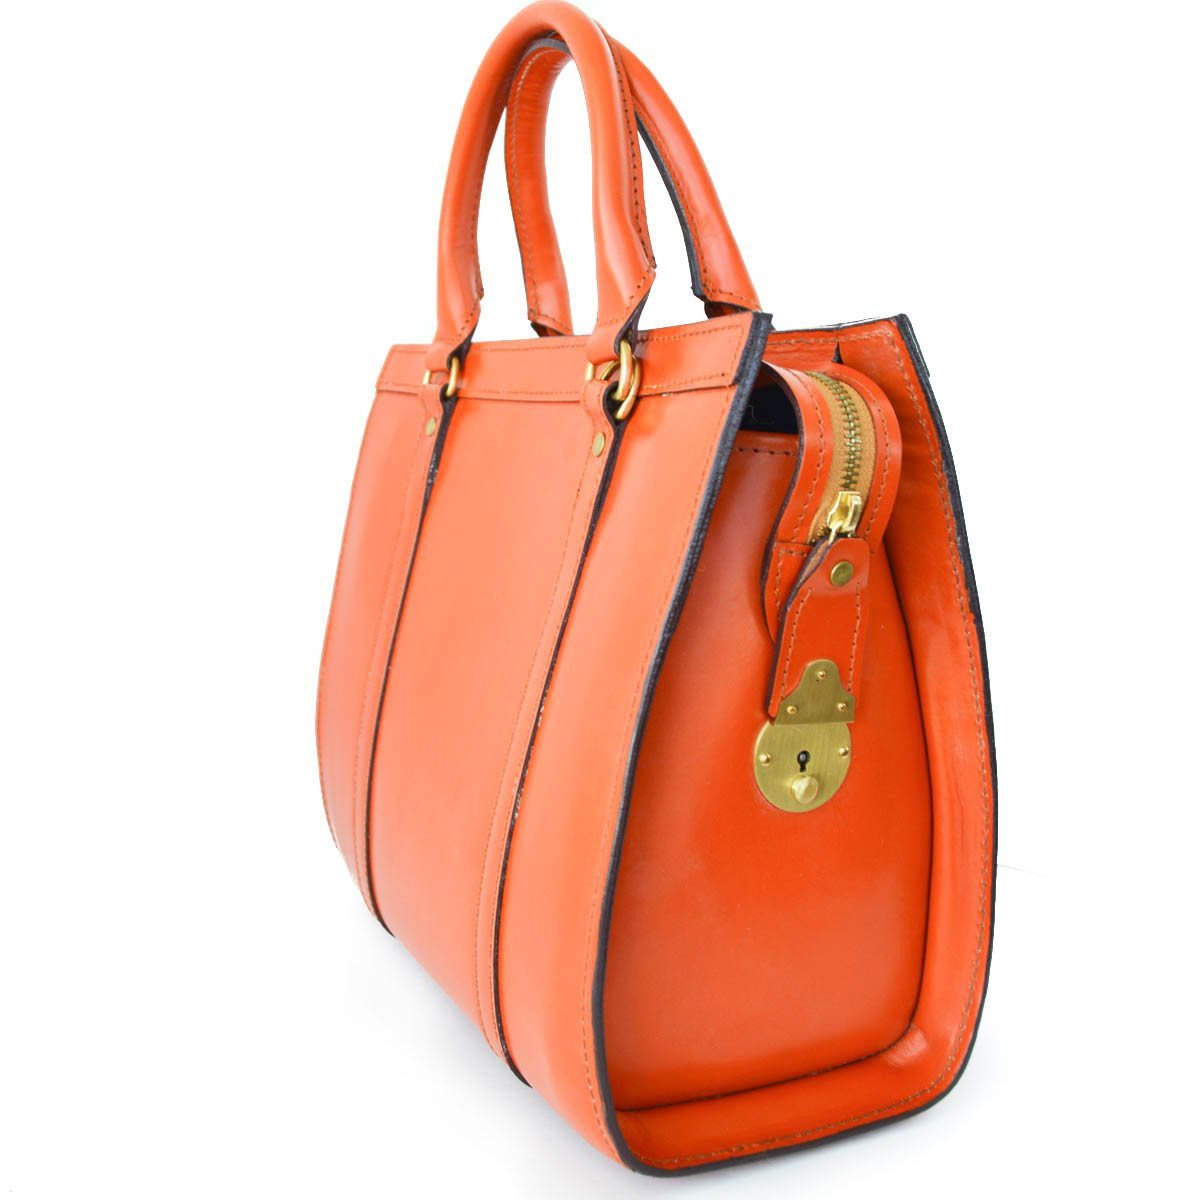 Classic Beatrice Handbag, London Tan | Hand Stitched | English Leather | Sterling and Burke-Handbag-Sterling-and-Burke